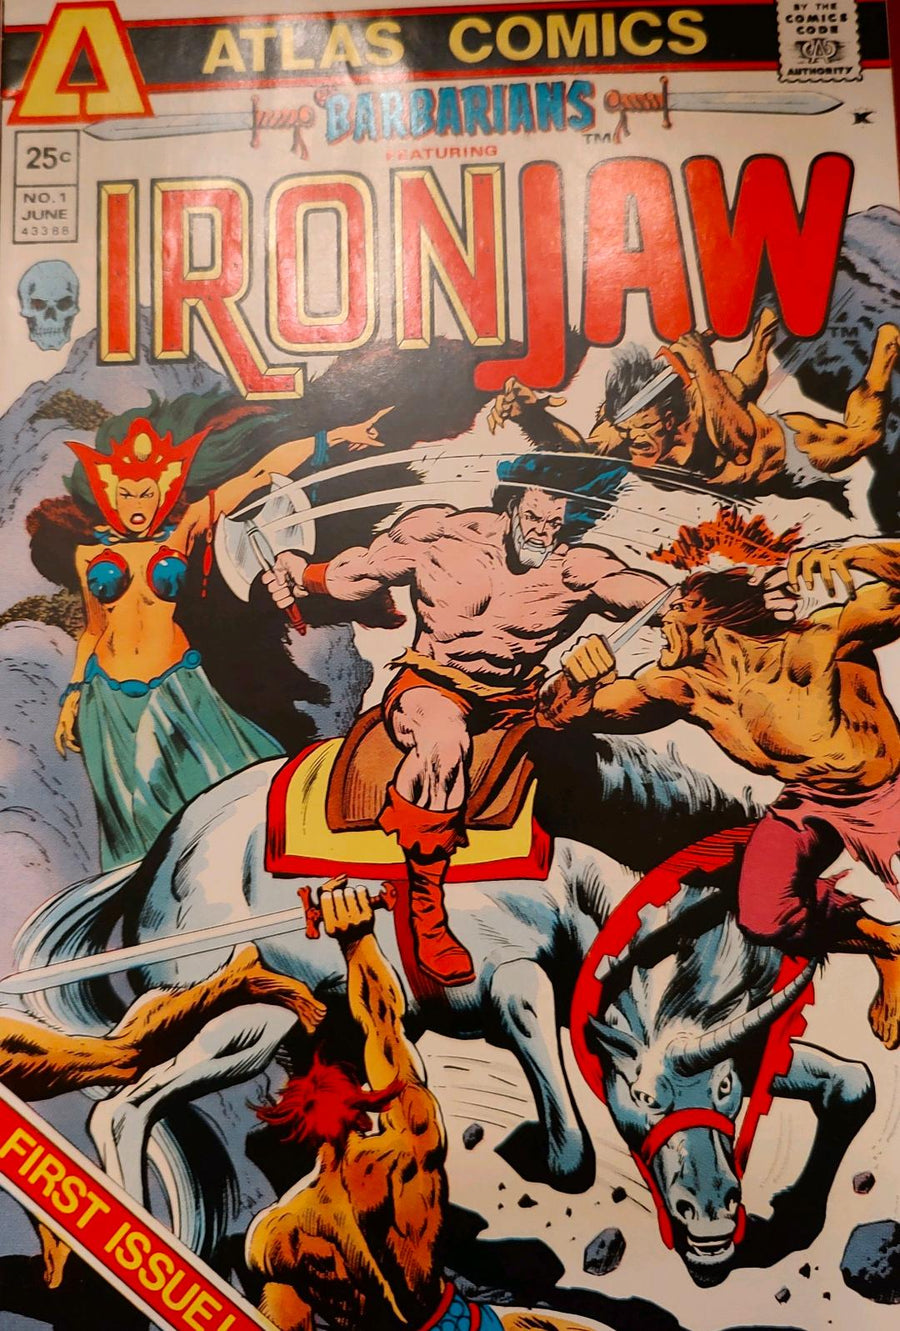 Barbarians #1 Comic Book Cover Photo 1975 featuring IronJaw